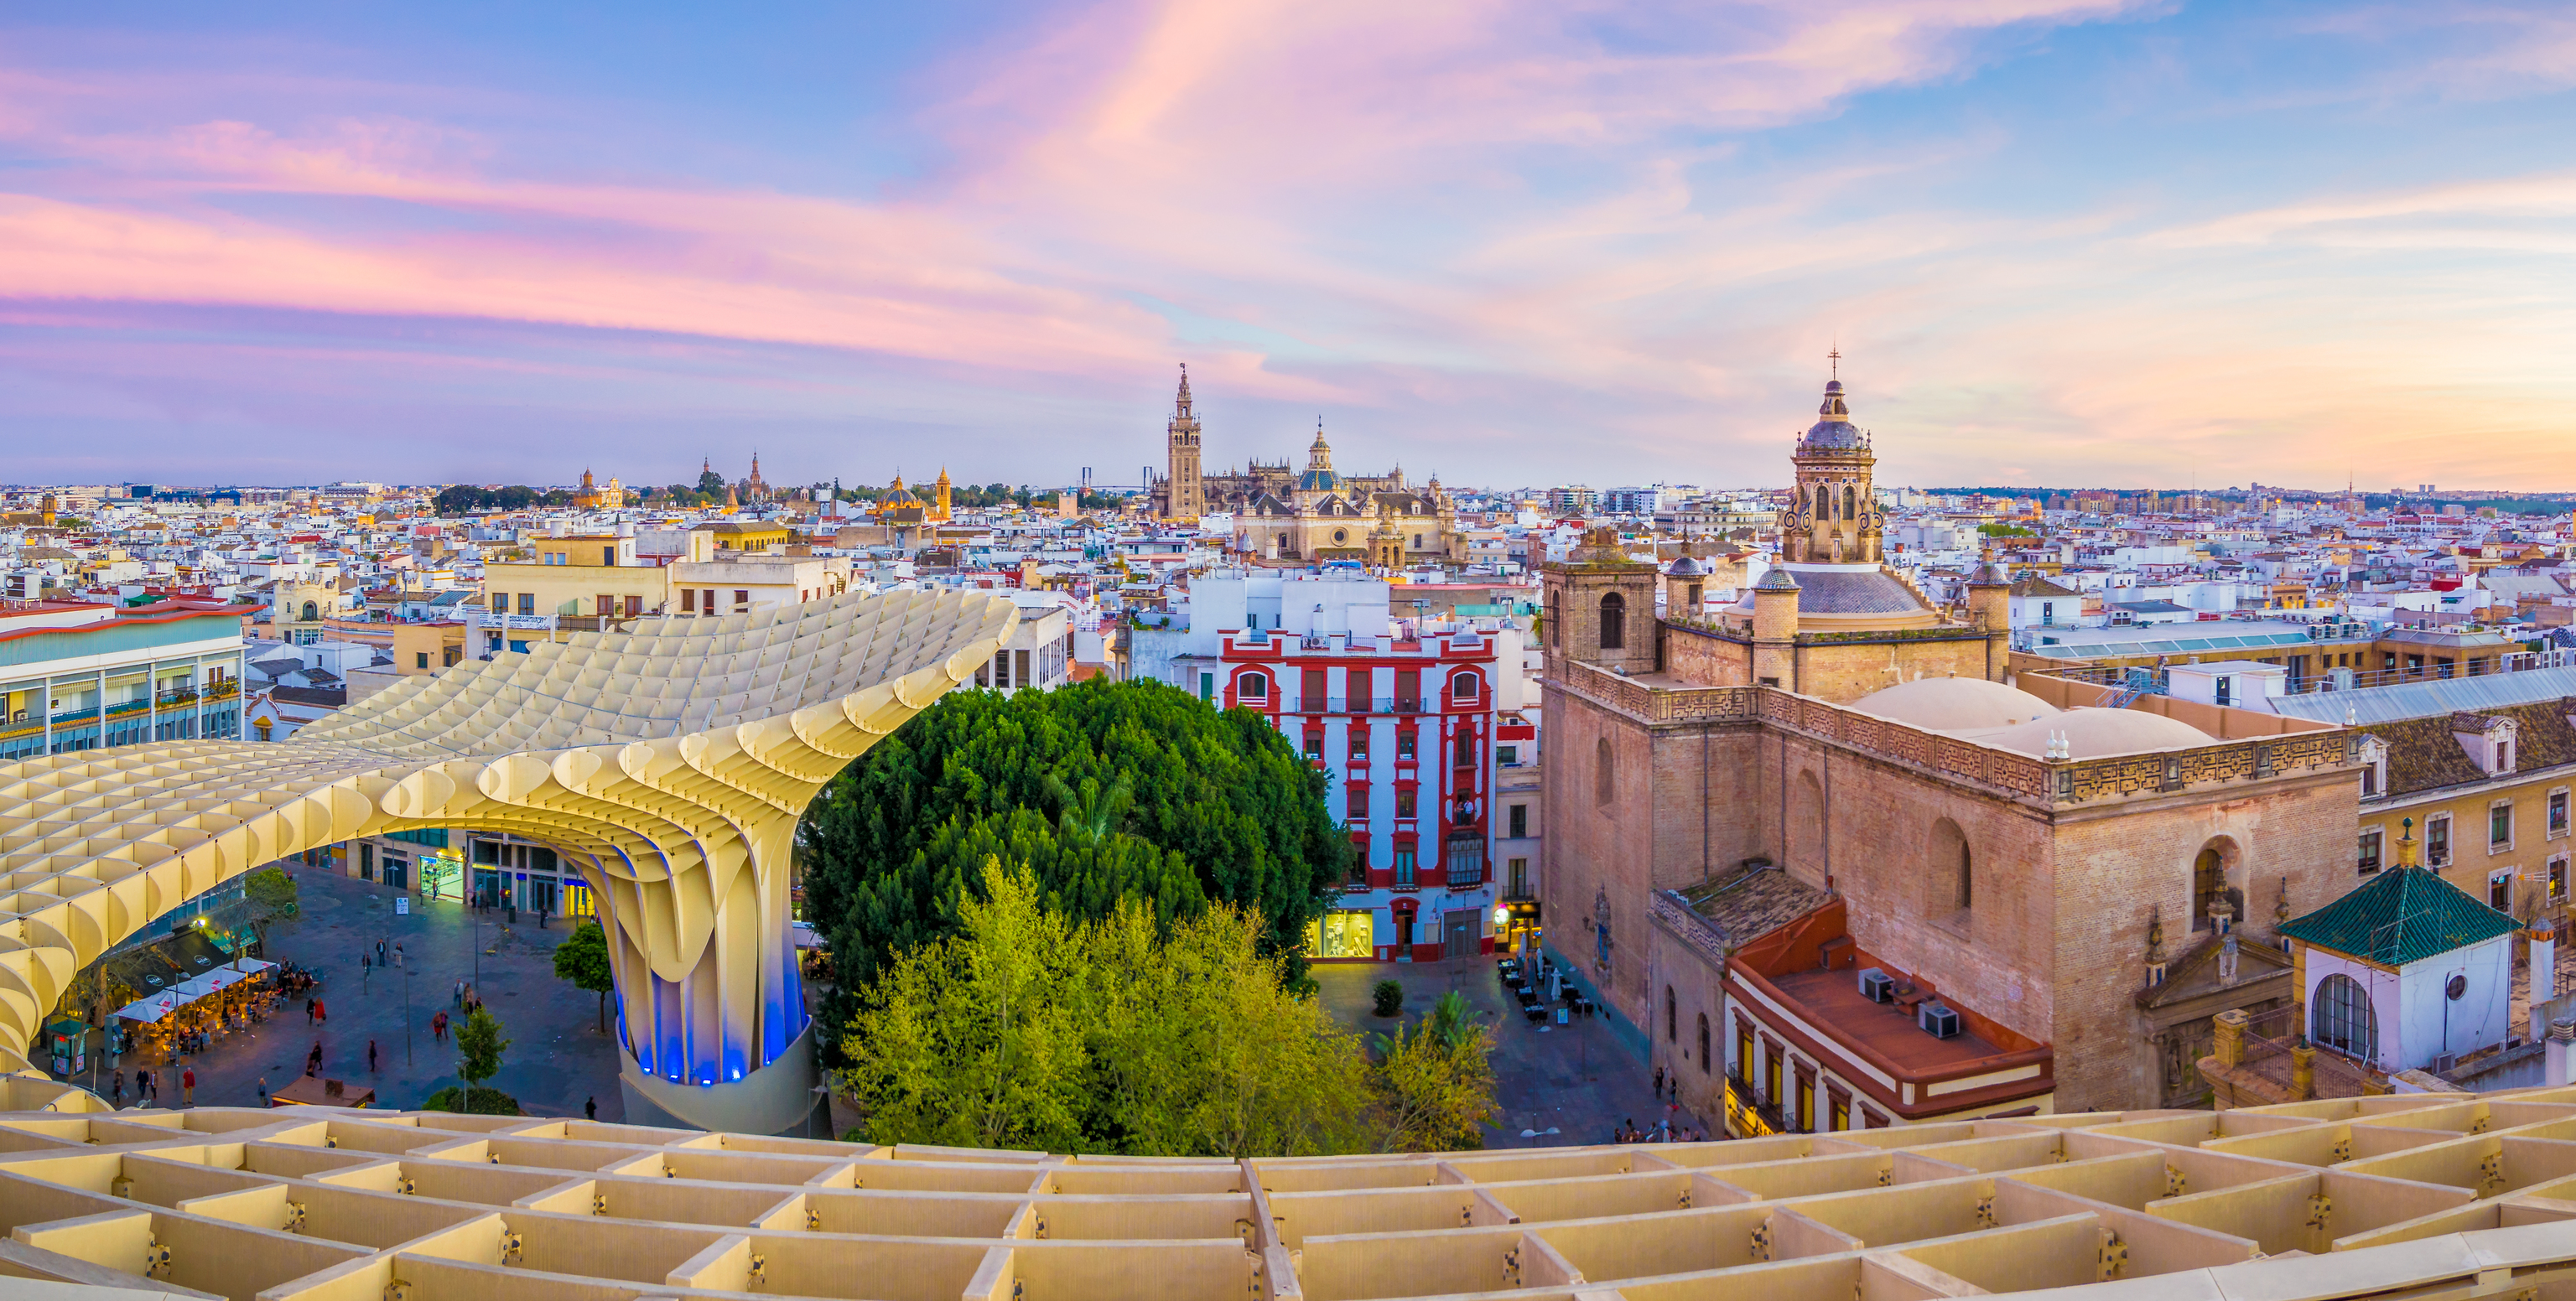 Panoramic view of Sevilla with the Guadalquivir River flowing through the city.